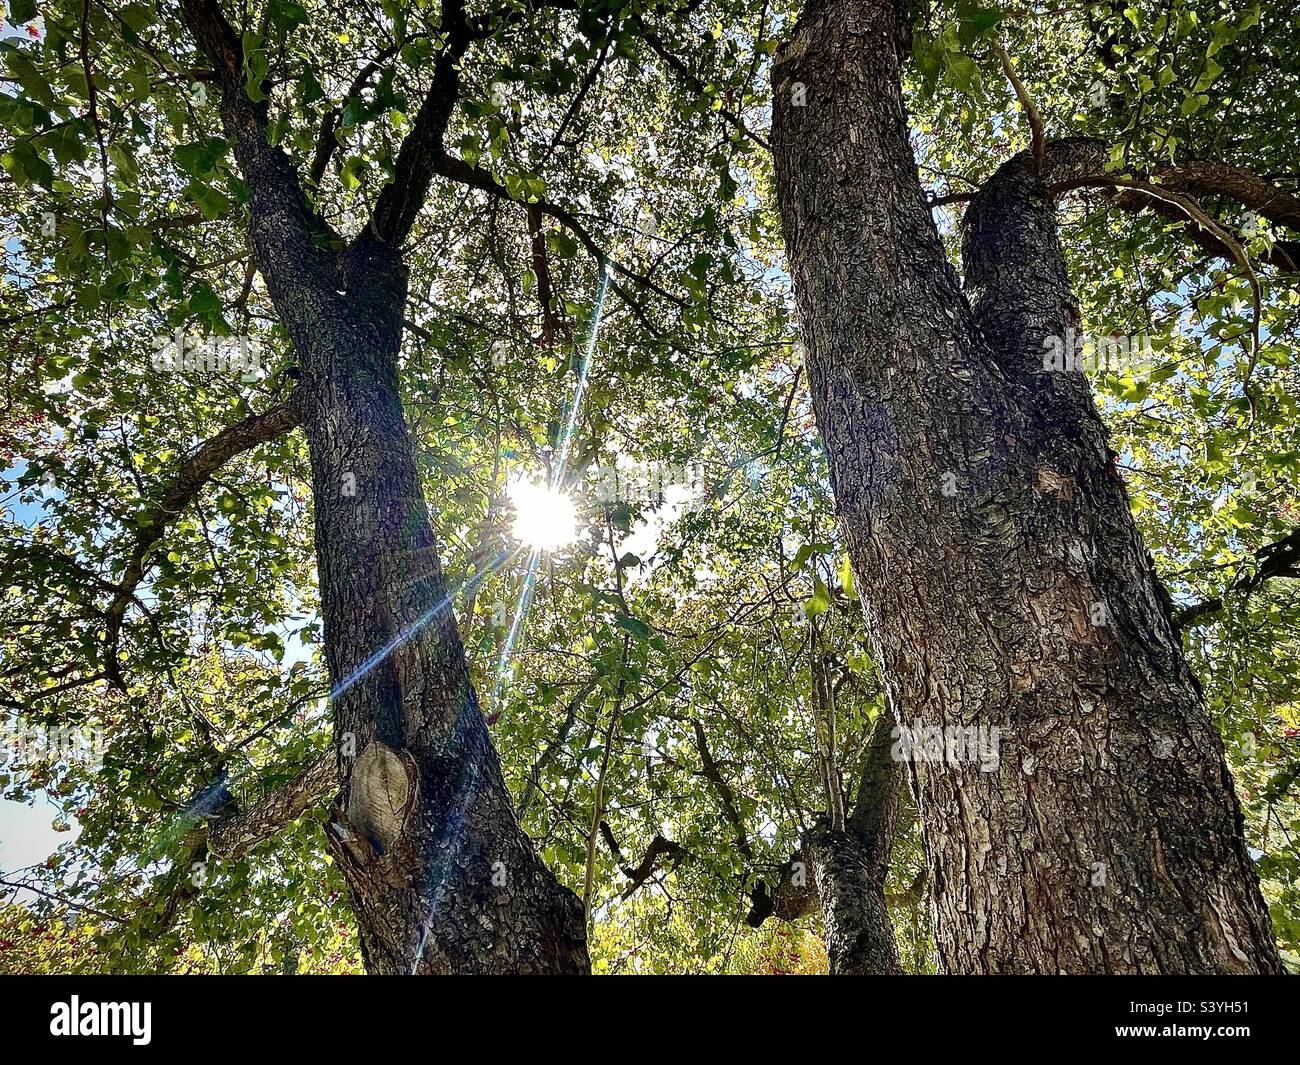 Shooting up from underneath this Hawthorn tree around midday during the fall season in Utah, USA. The sun shines down through the tree branches, leaves and berries as the tree trunks rise upward. Stock Photo